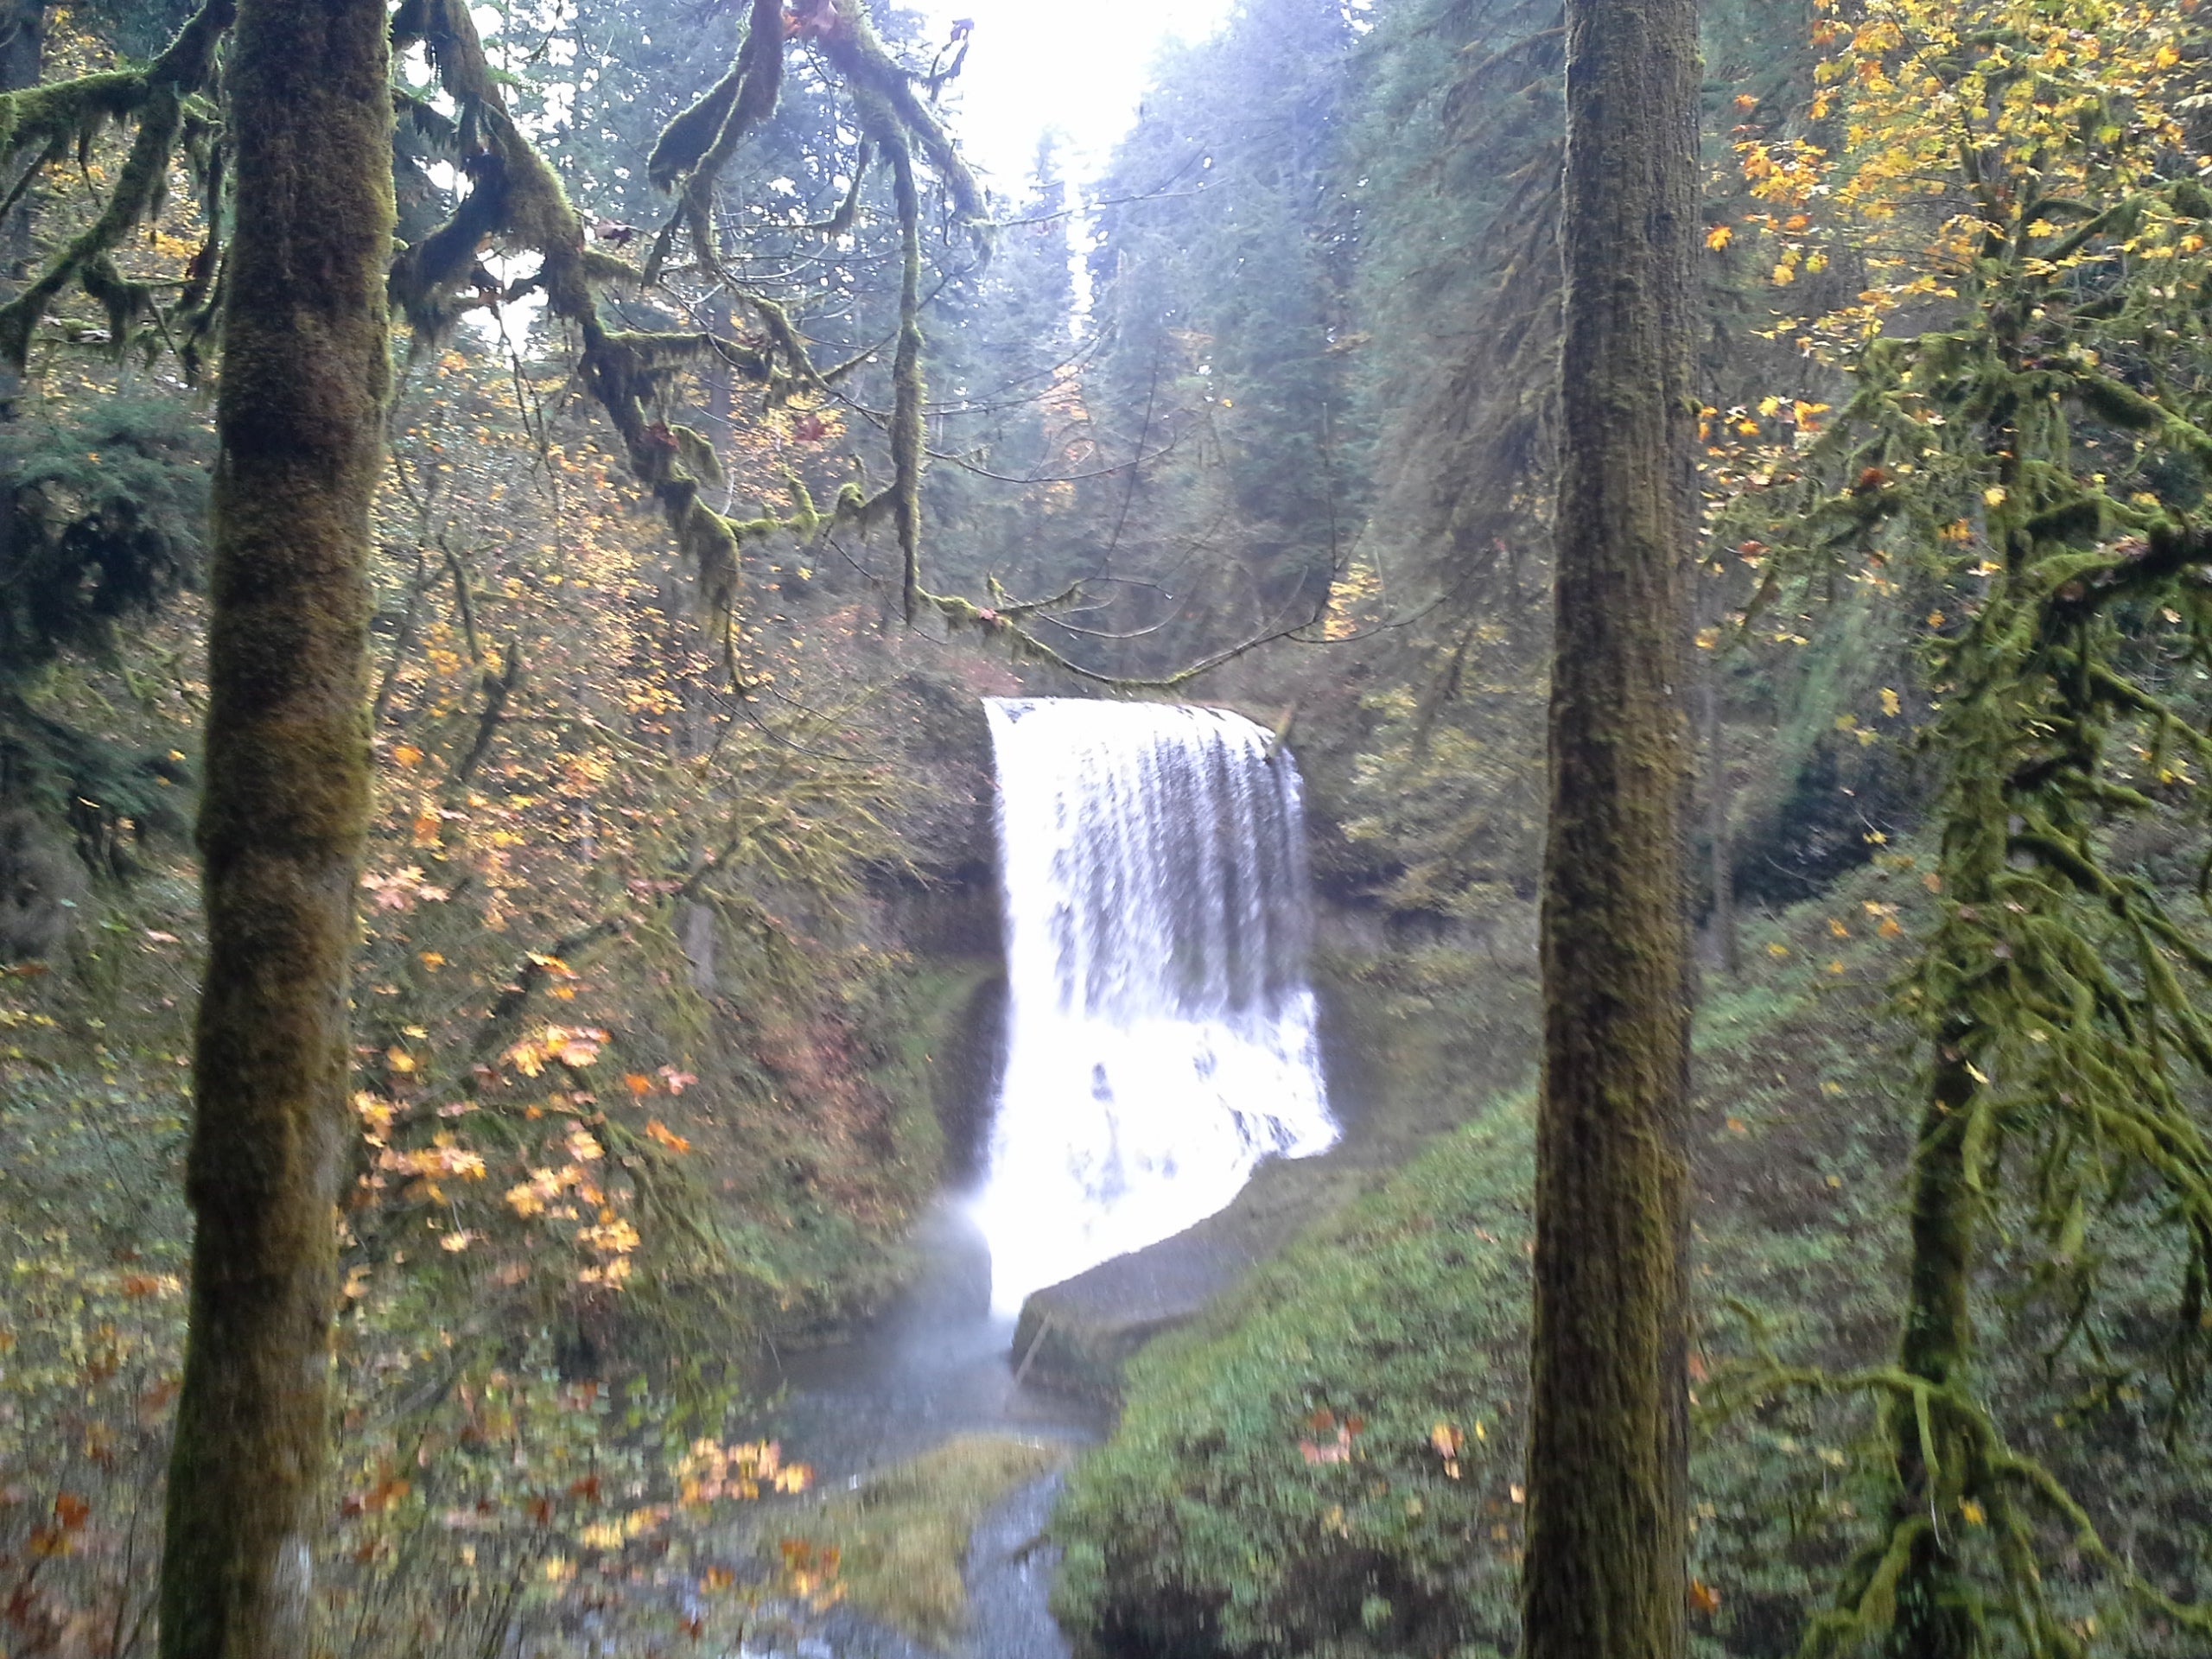 Camper submitted image from Silver Falls State Park - 2